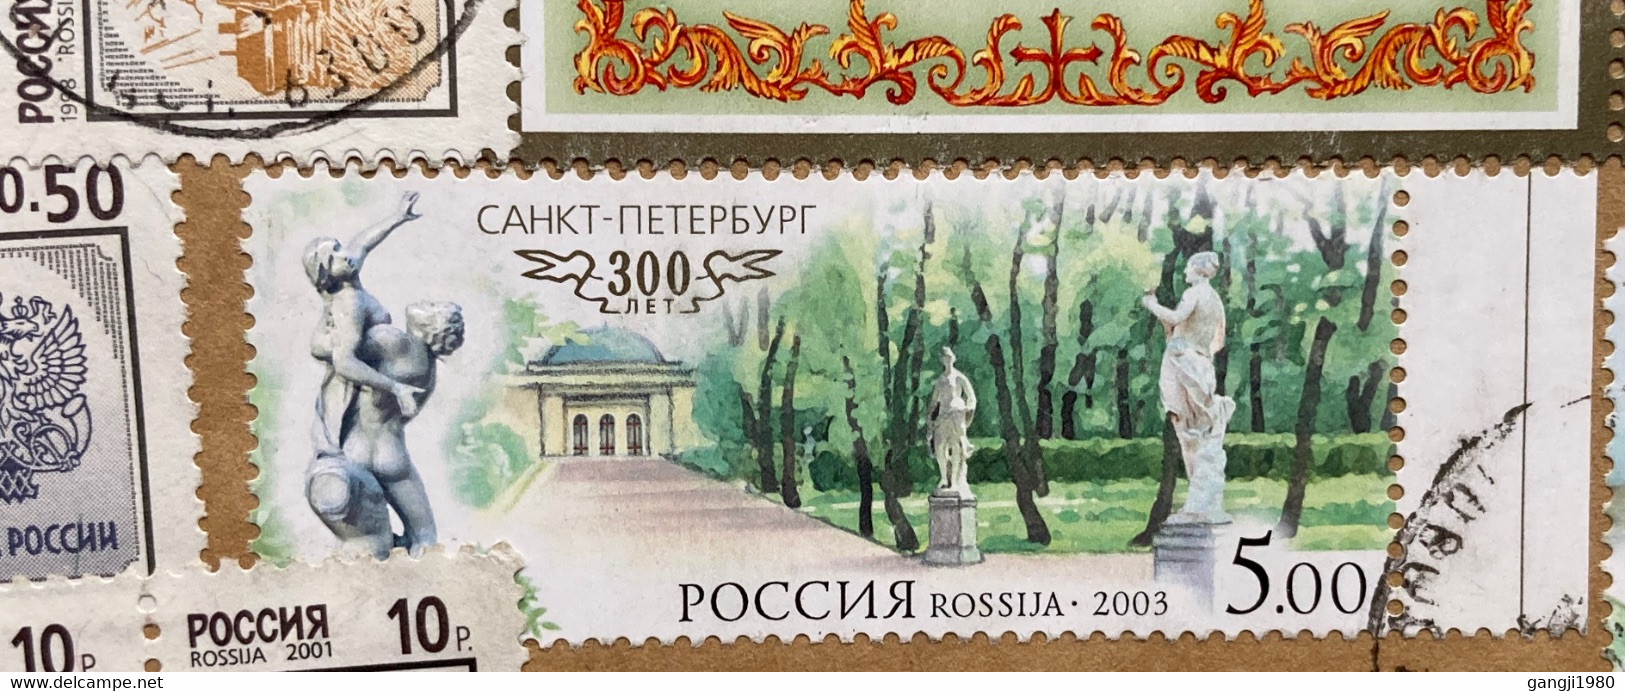 RUSSIA 2003, BLOCK BUILDING,ARCHITECTURE,NATURE,STATUE,DANCE,GLOBE,COUPLE, 22 STAMPS,COVER 3 SIDE OPEN USED TO INDIA